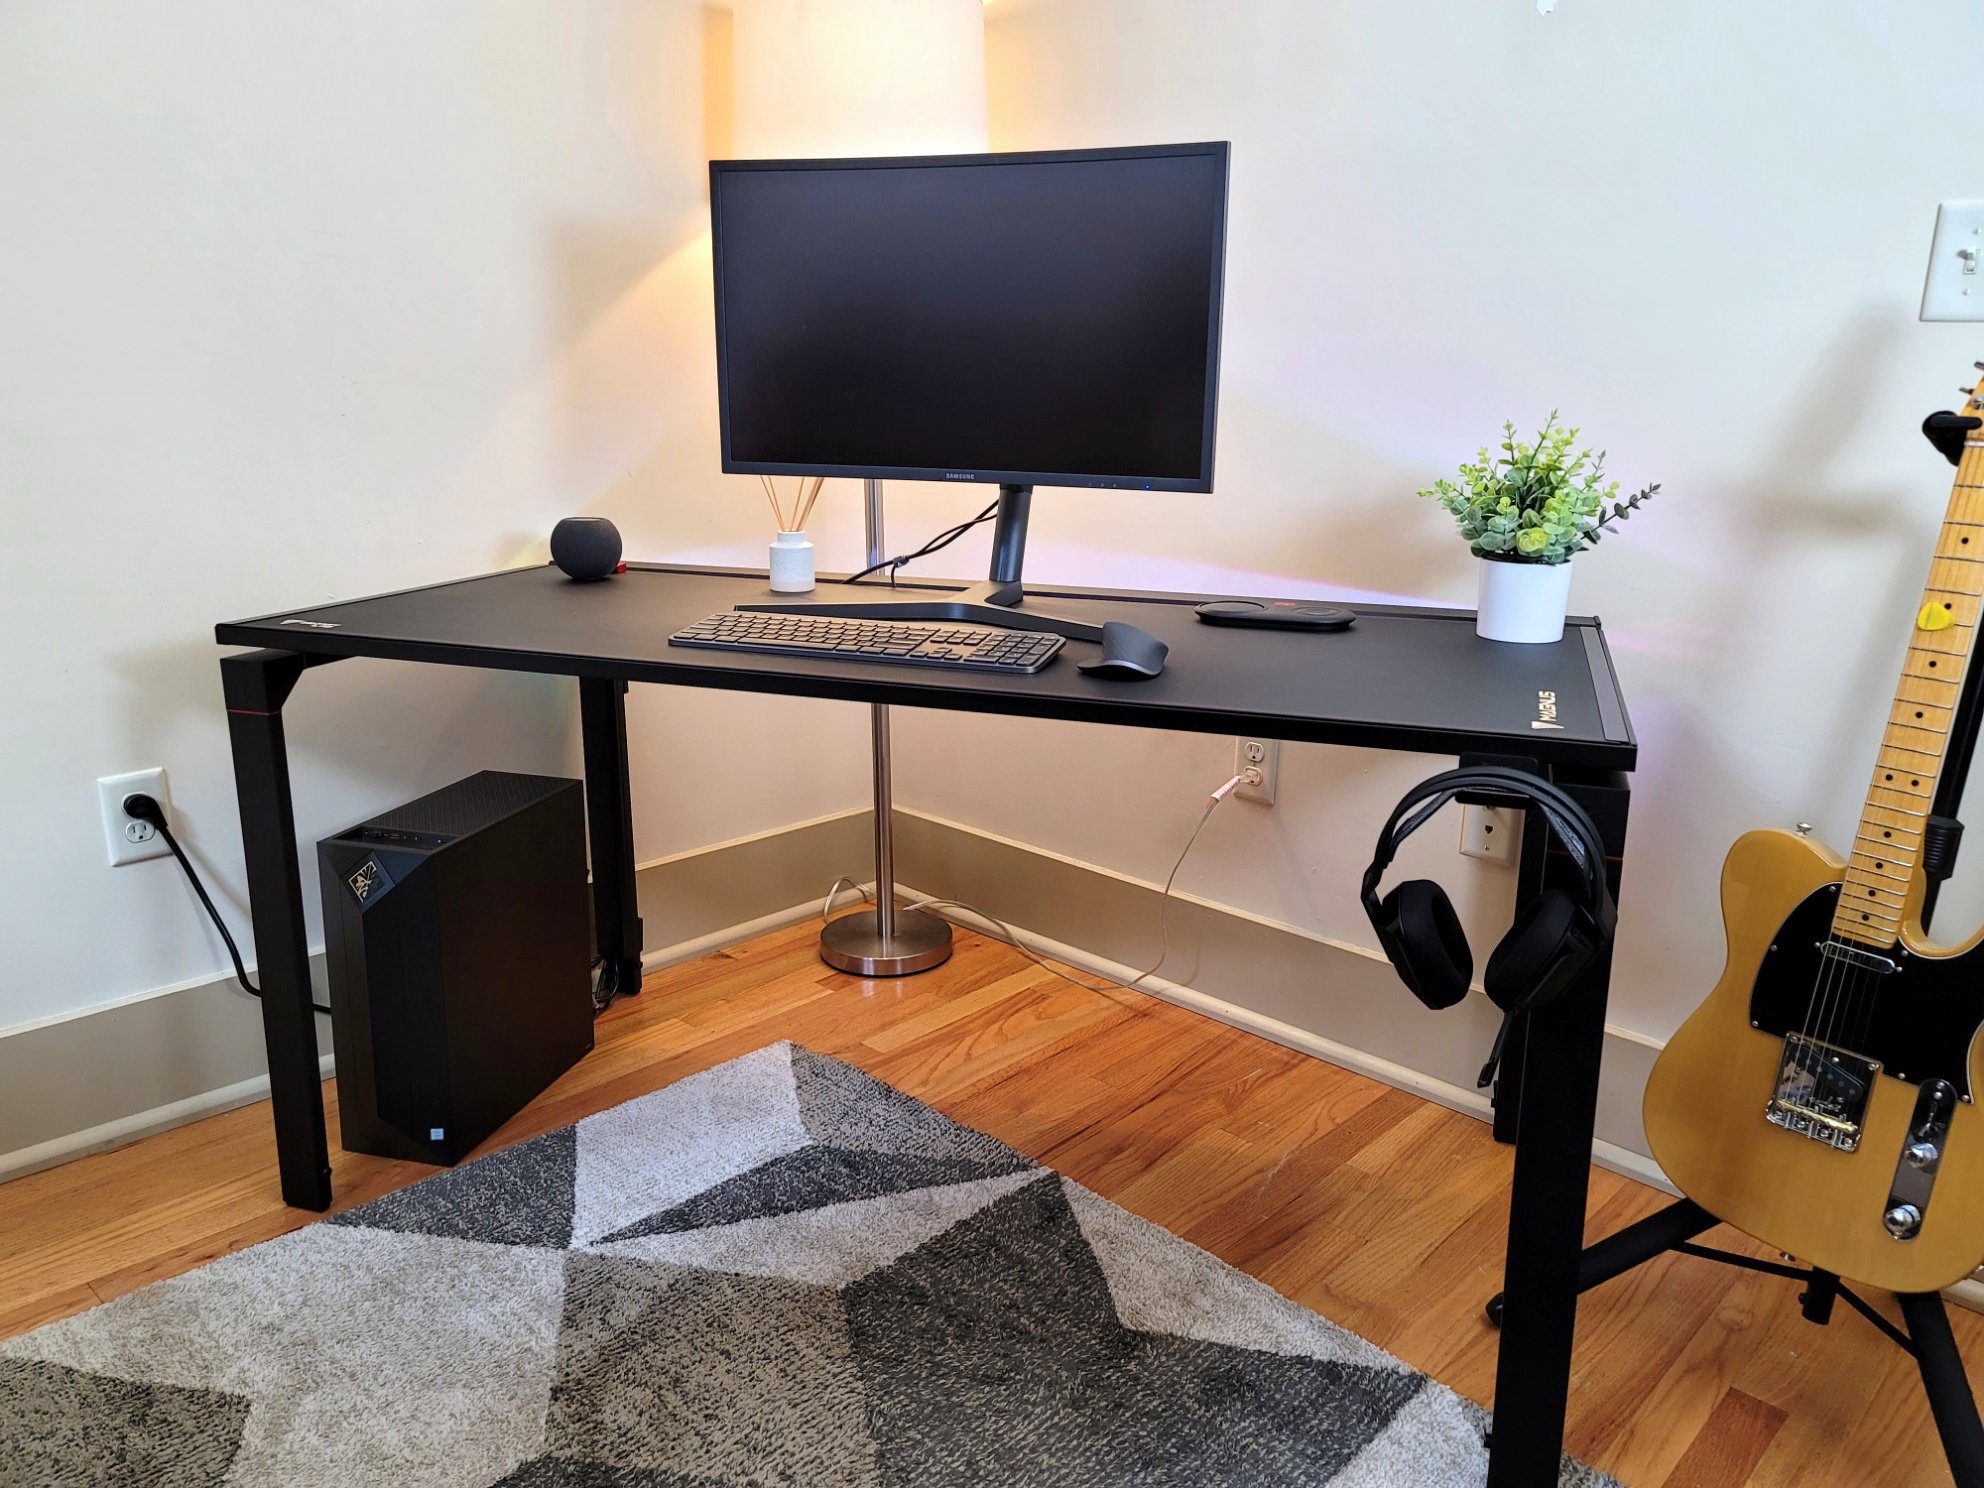 Secretlab on X: “If you're looking for a sturdy gaming desk that is as  stylish as it is reliable, check out the Secretlab MAGNUS Metal Desk.” -  @LaptopMag Find out why the